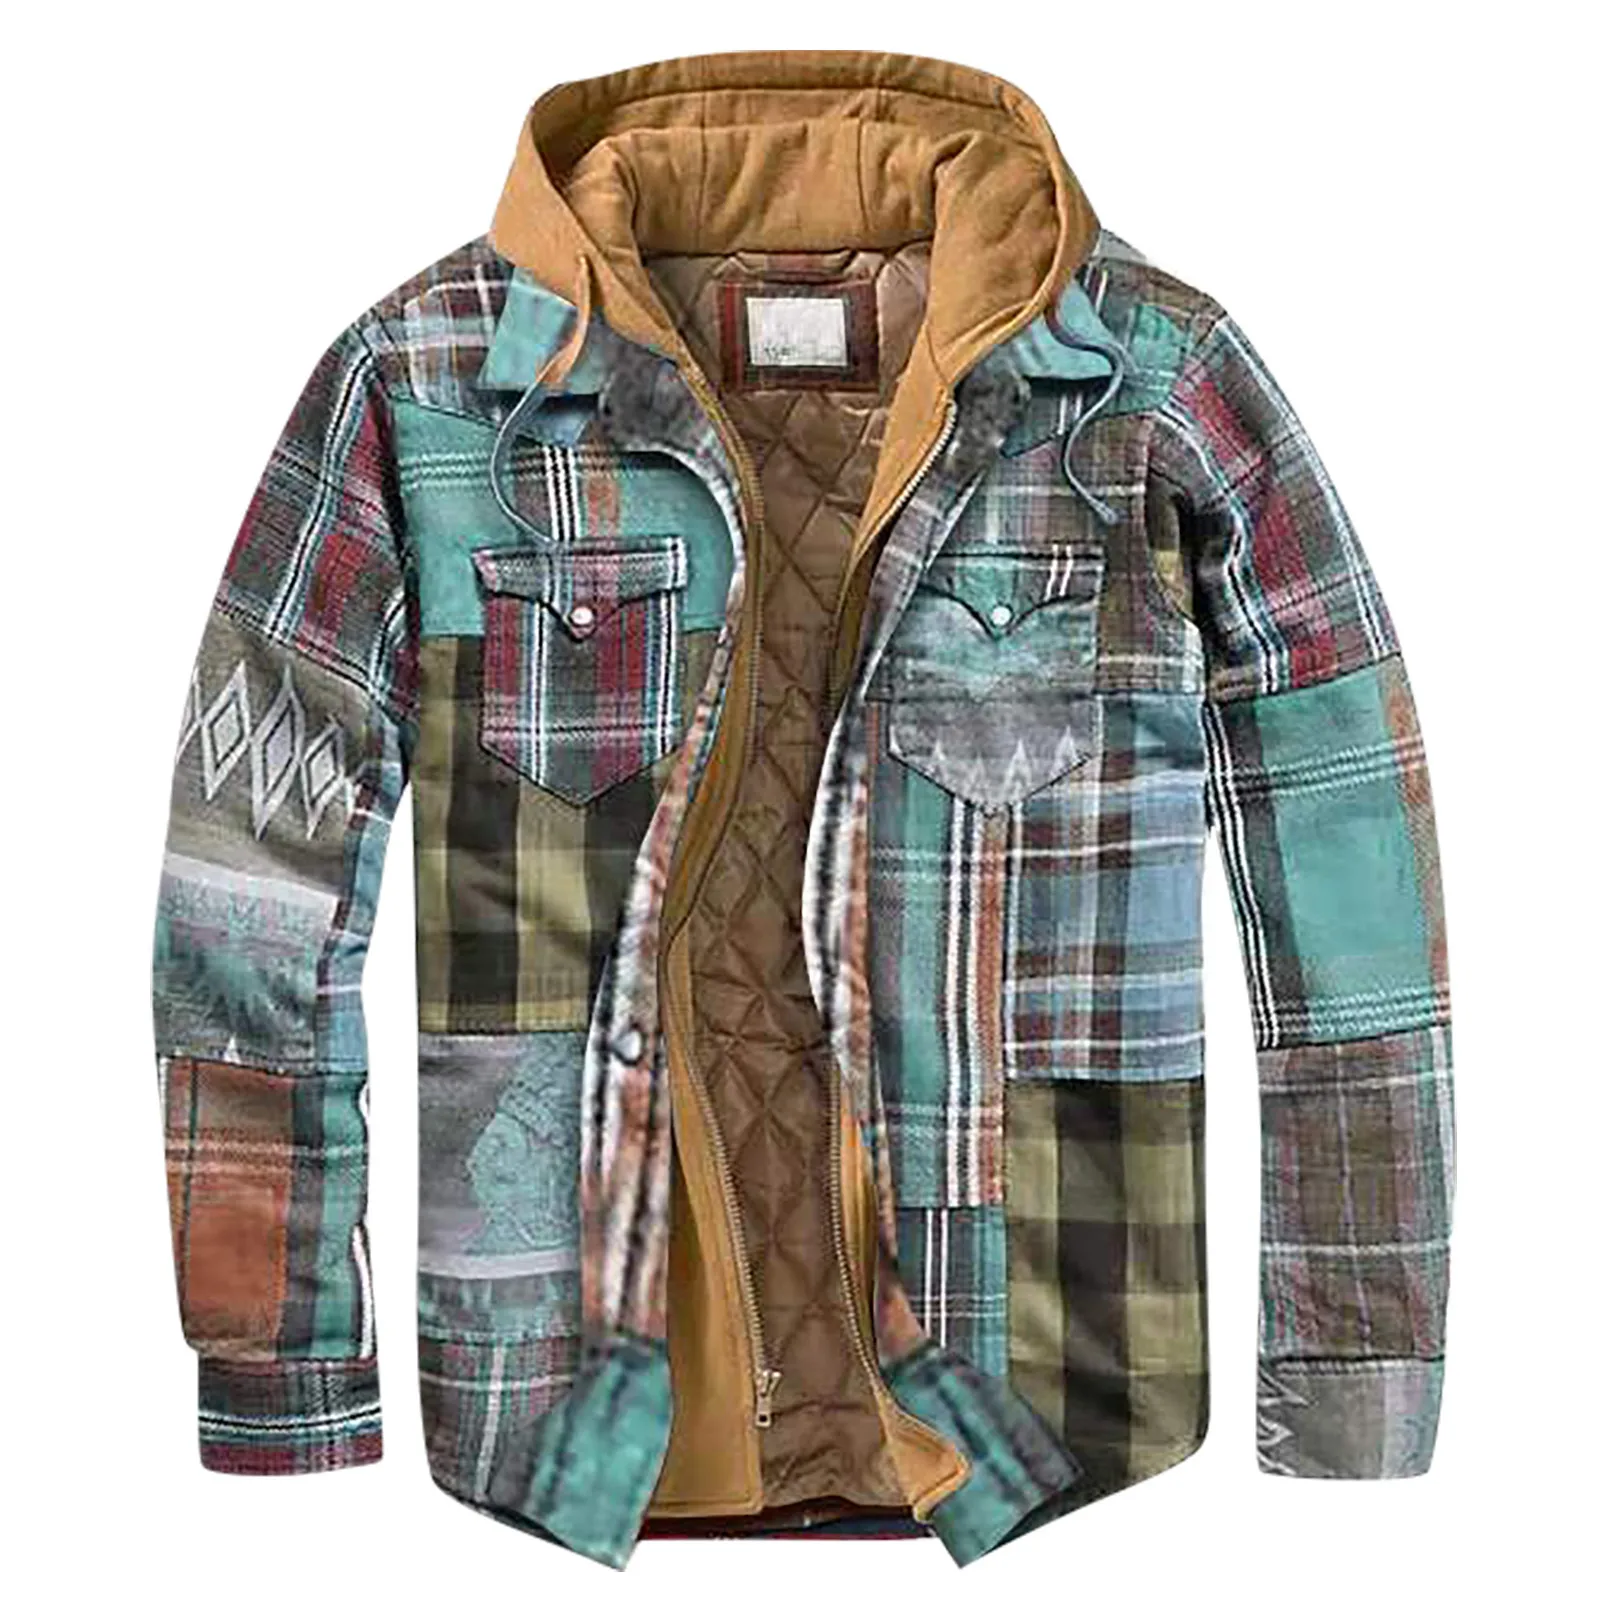 

Men's Quilted Lined Button Down Plaid Shirt Add Velvet To Keep Warm Jackets With Hood chamarras para hombre jackets for men